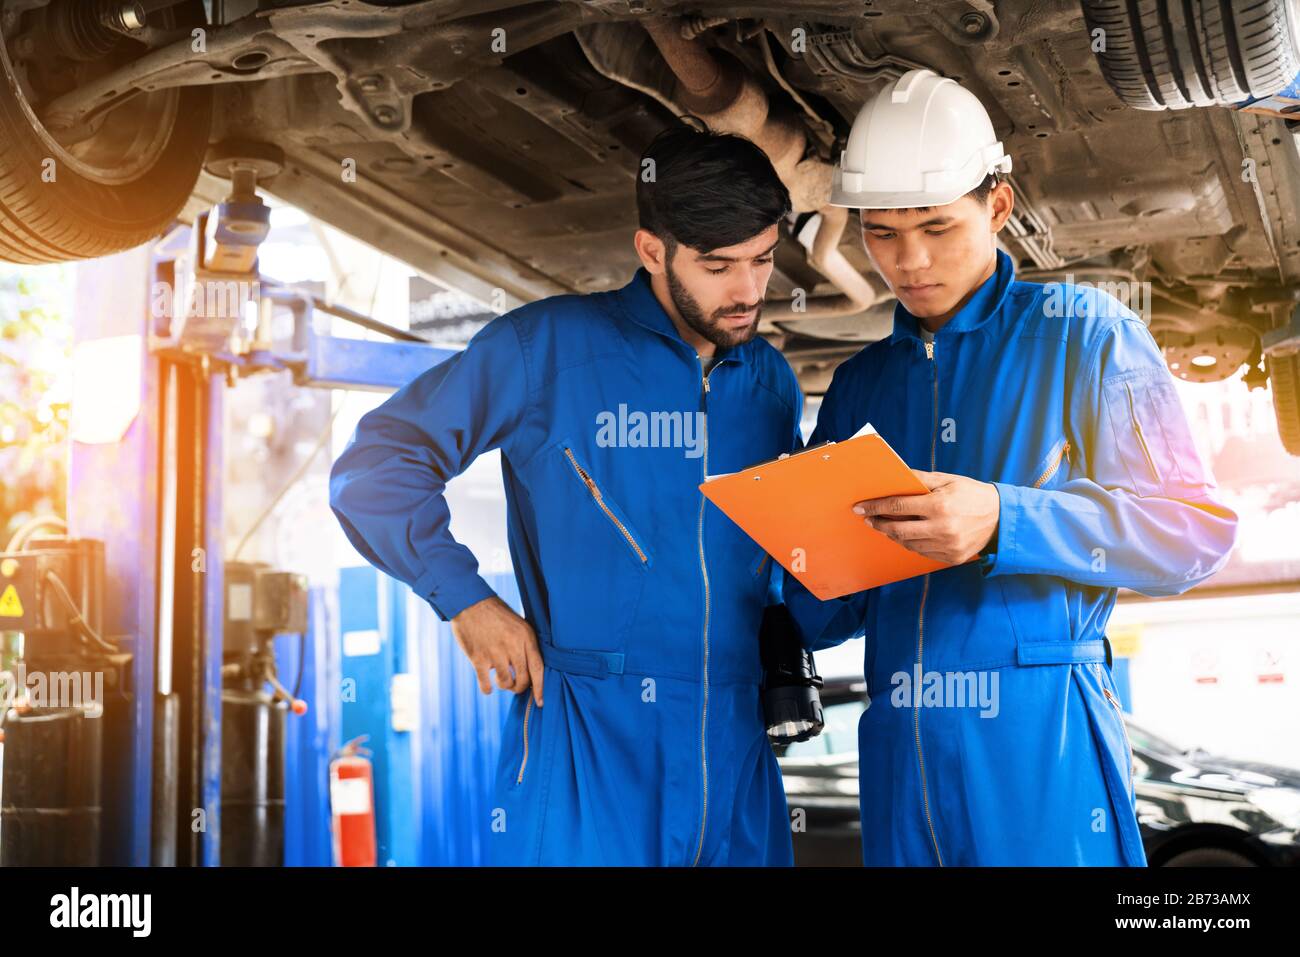 Mechanic in blue work wear uniform inspects the car bottom with his assistant. Automobile repairing service, Professional occupation teamwork. Stock Photo